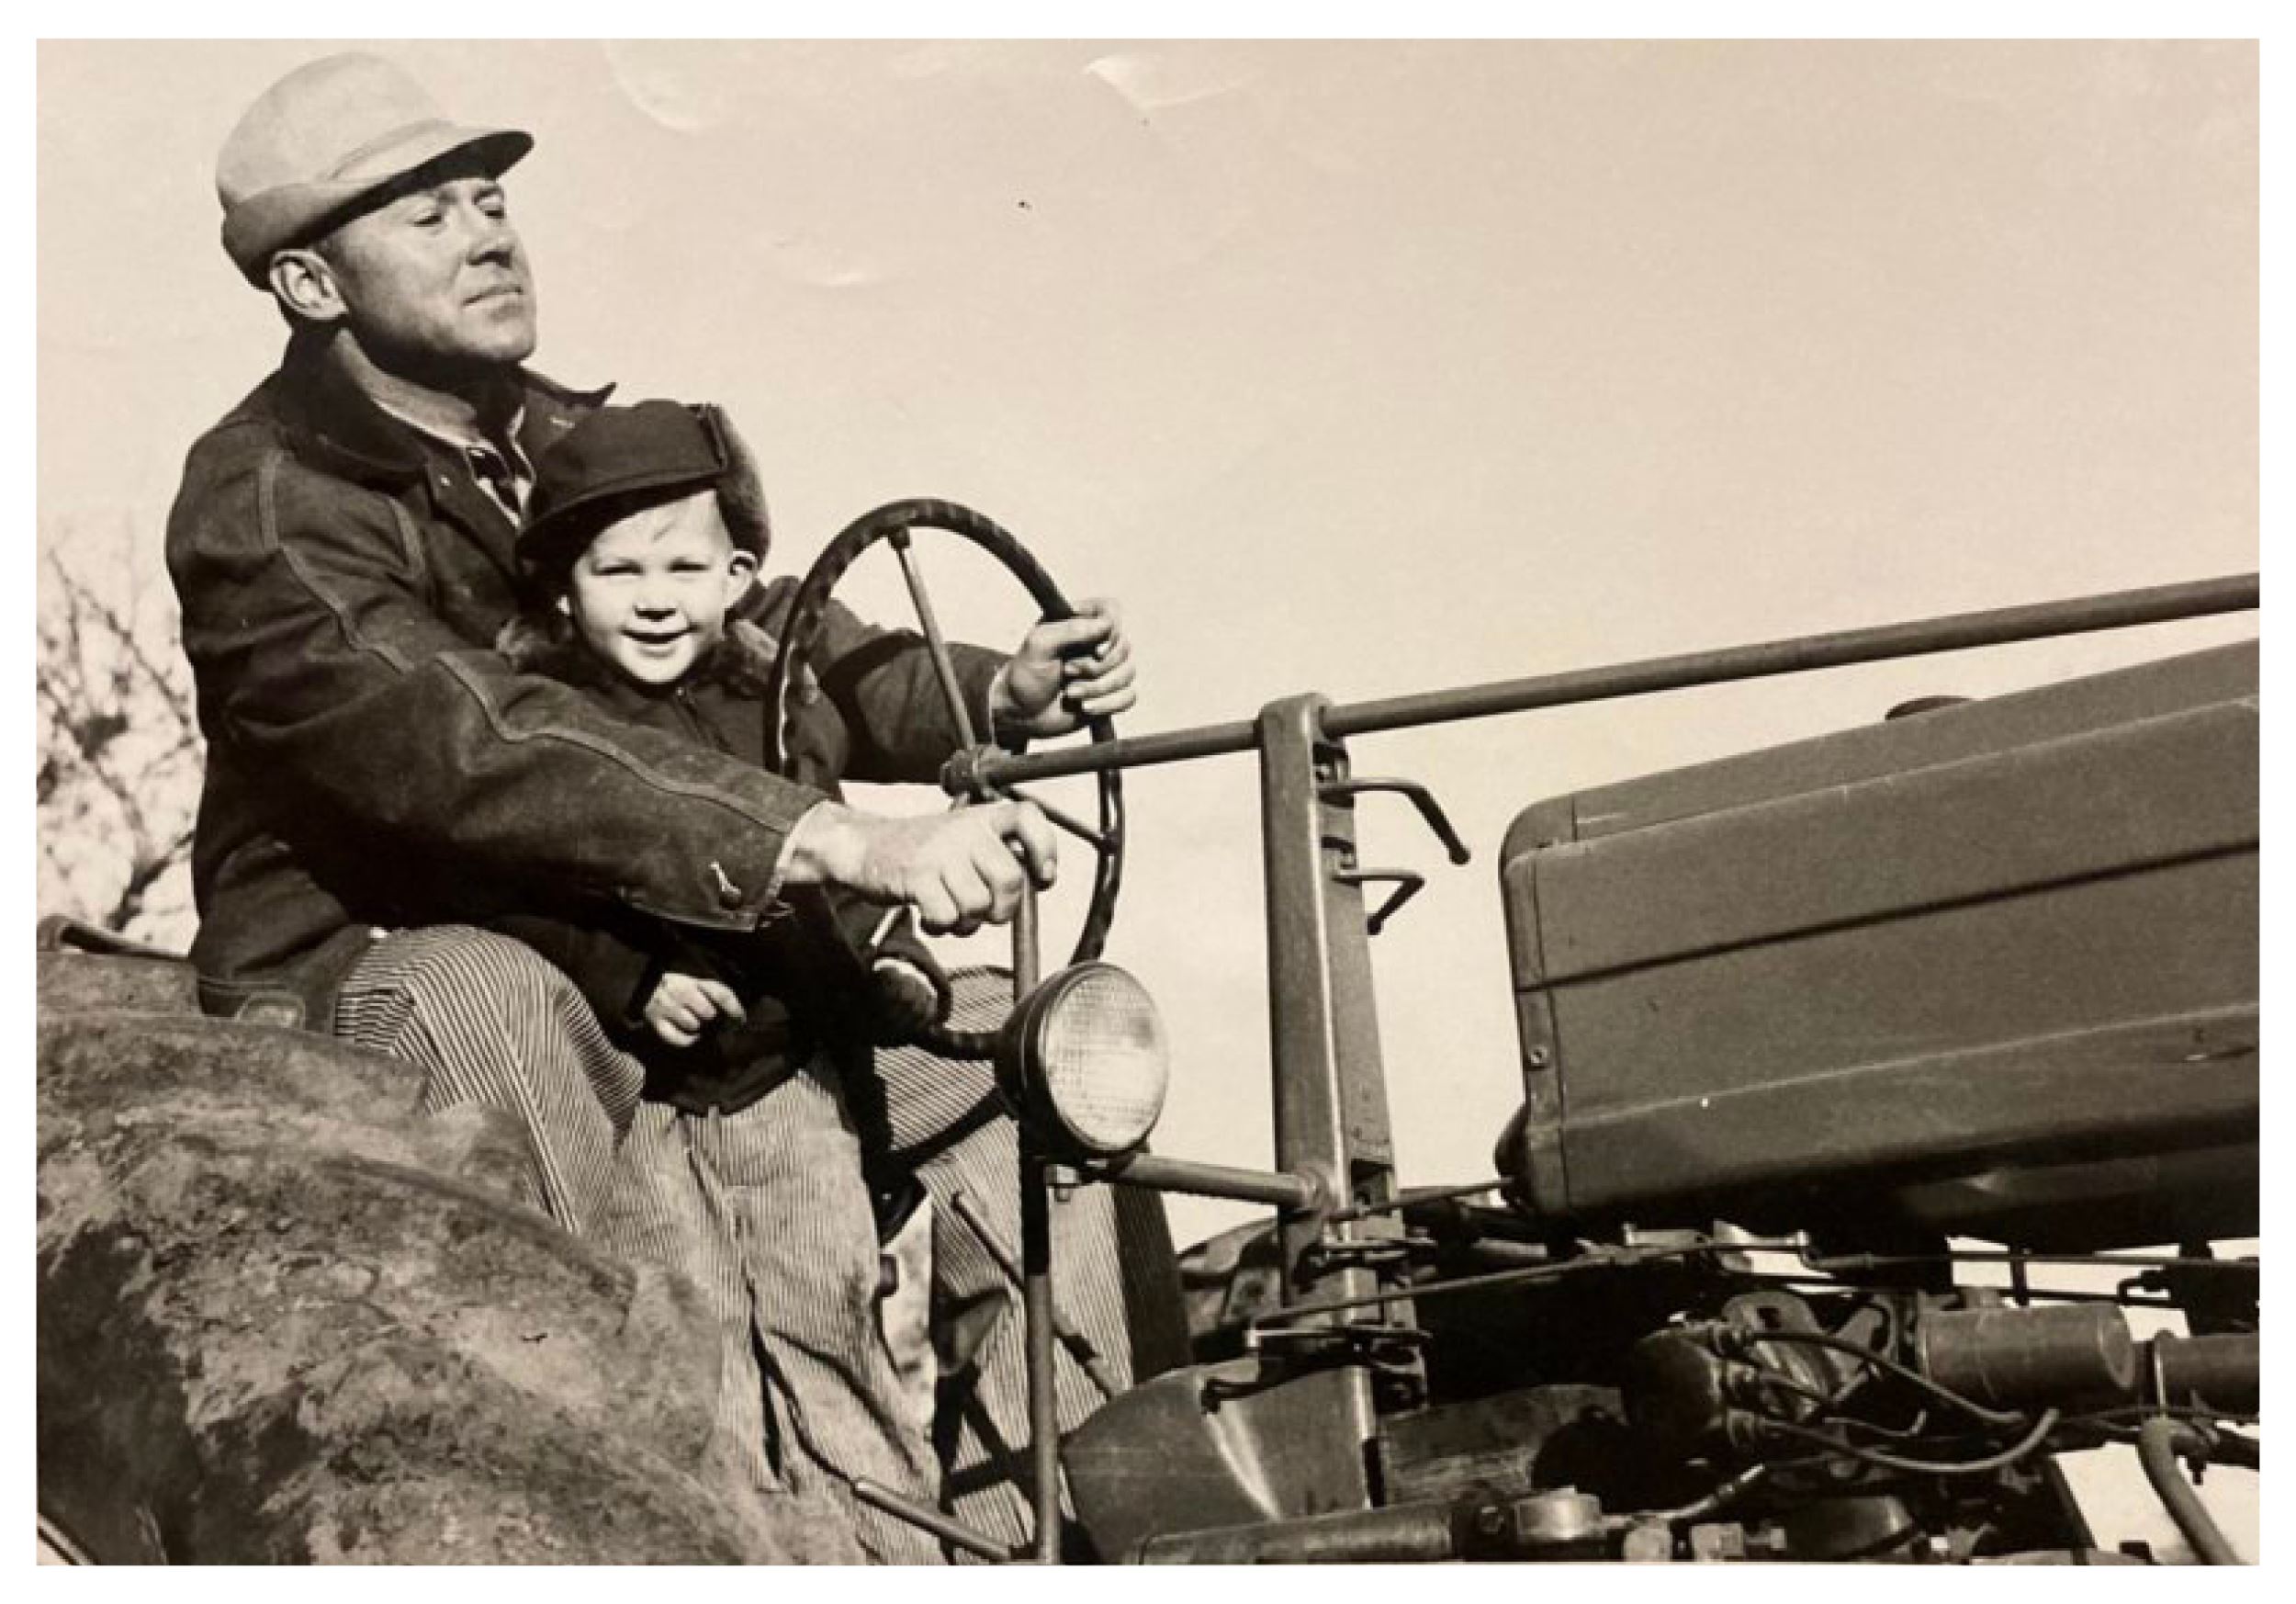 Carl with his father, Don, on a tractor on the farm.